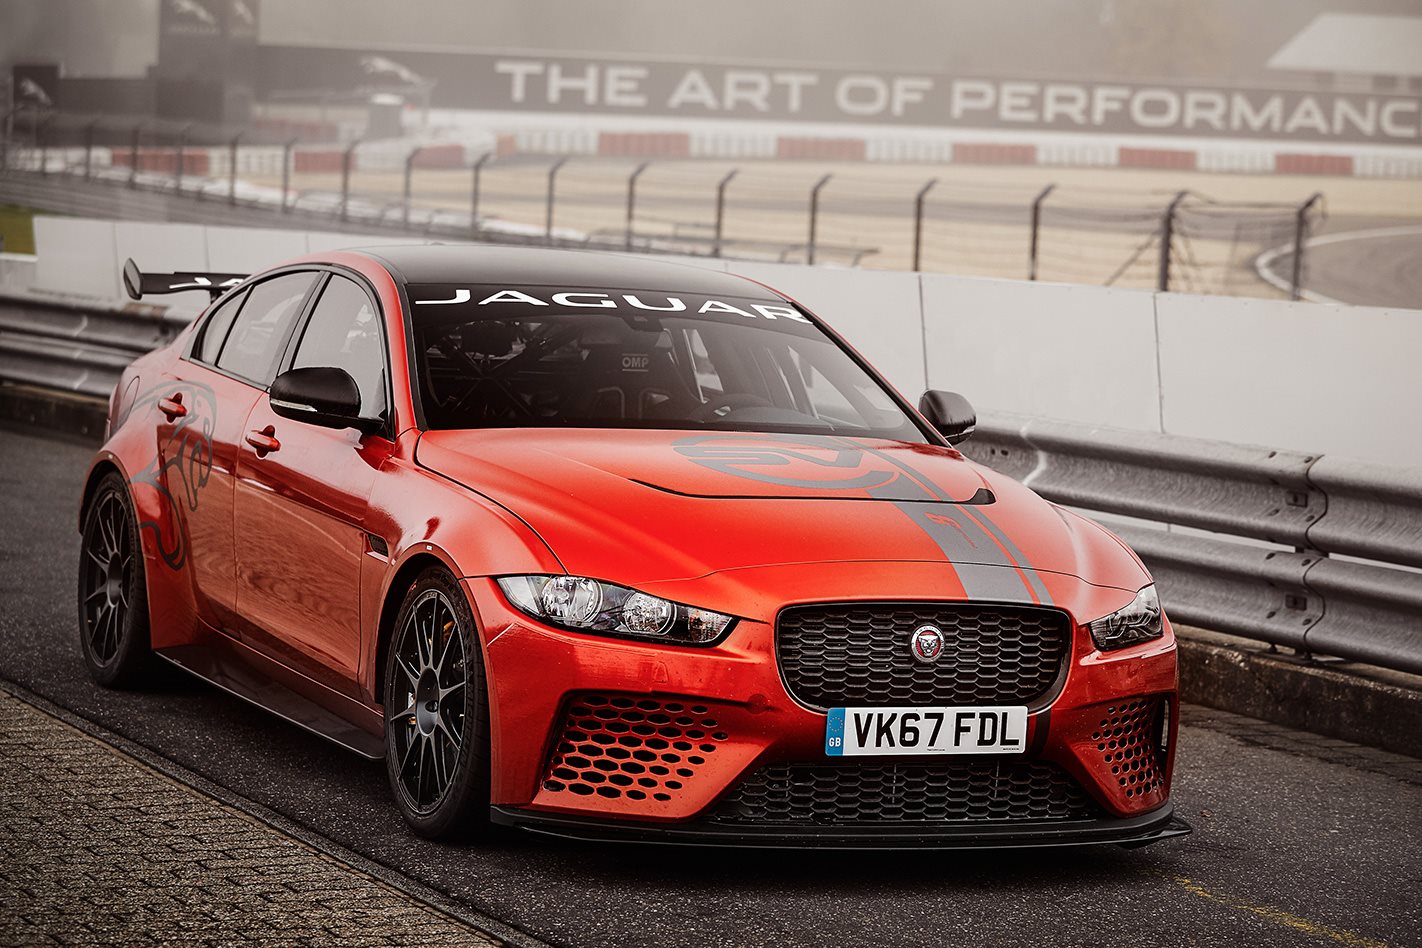  Jaguar  XE  SV Project 8 claims N rburgring record for 